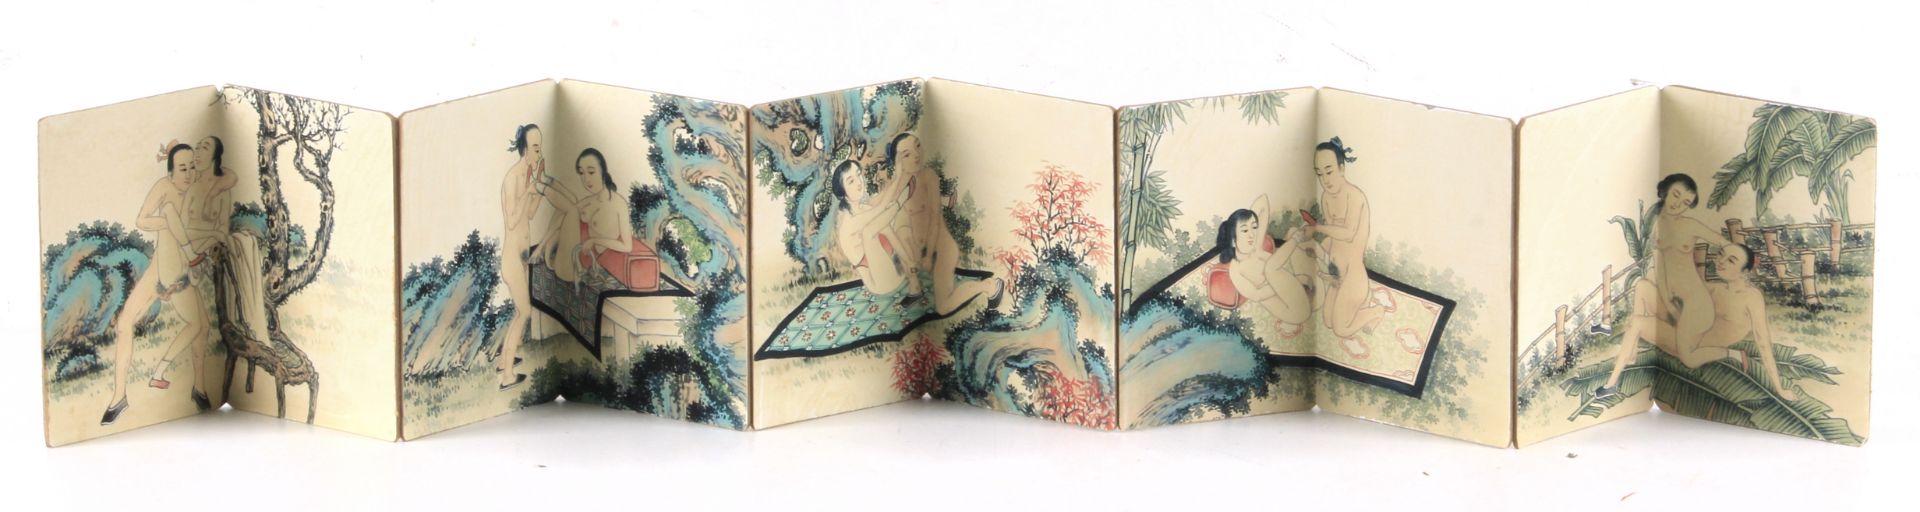 A 20th century Chinese erotic book